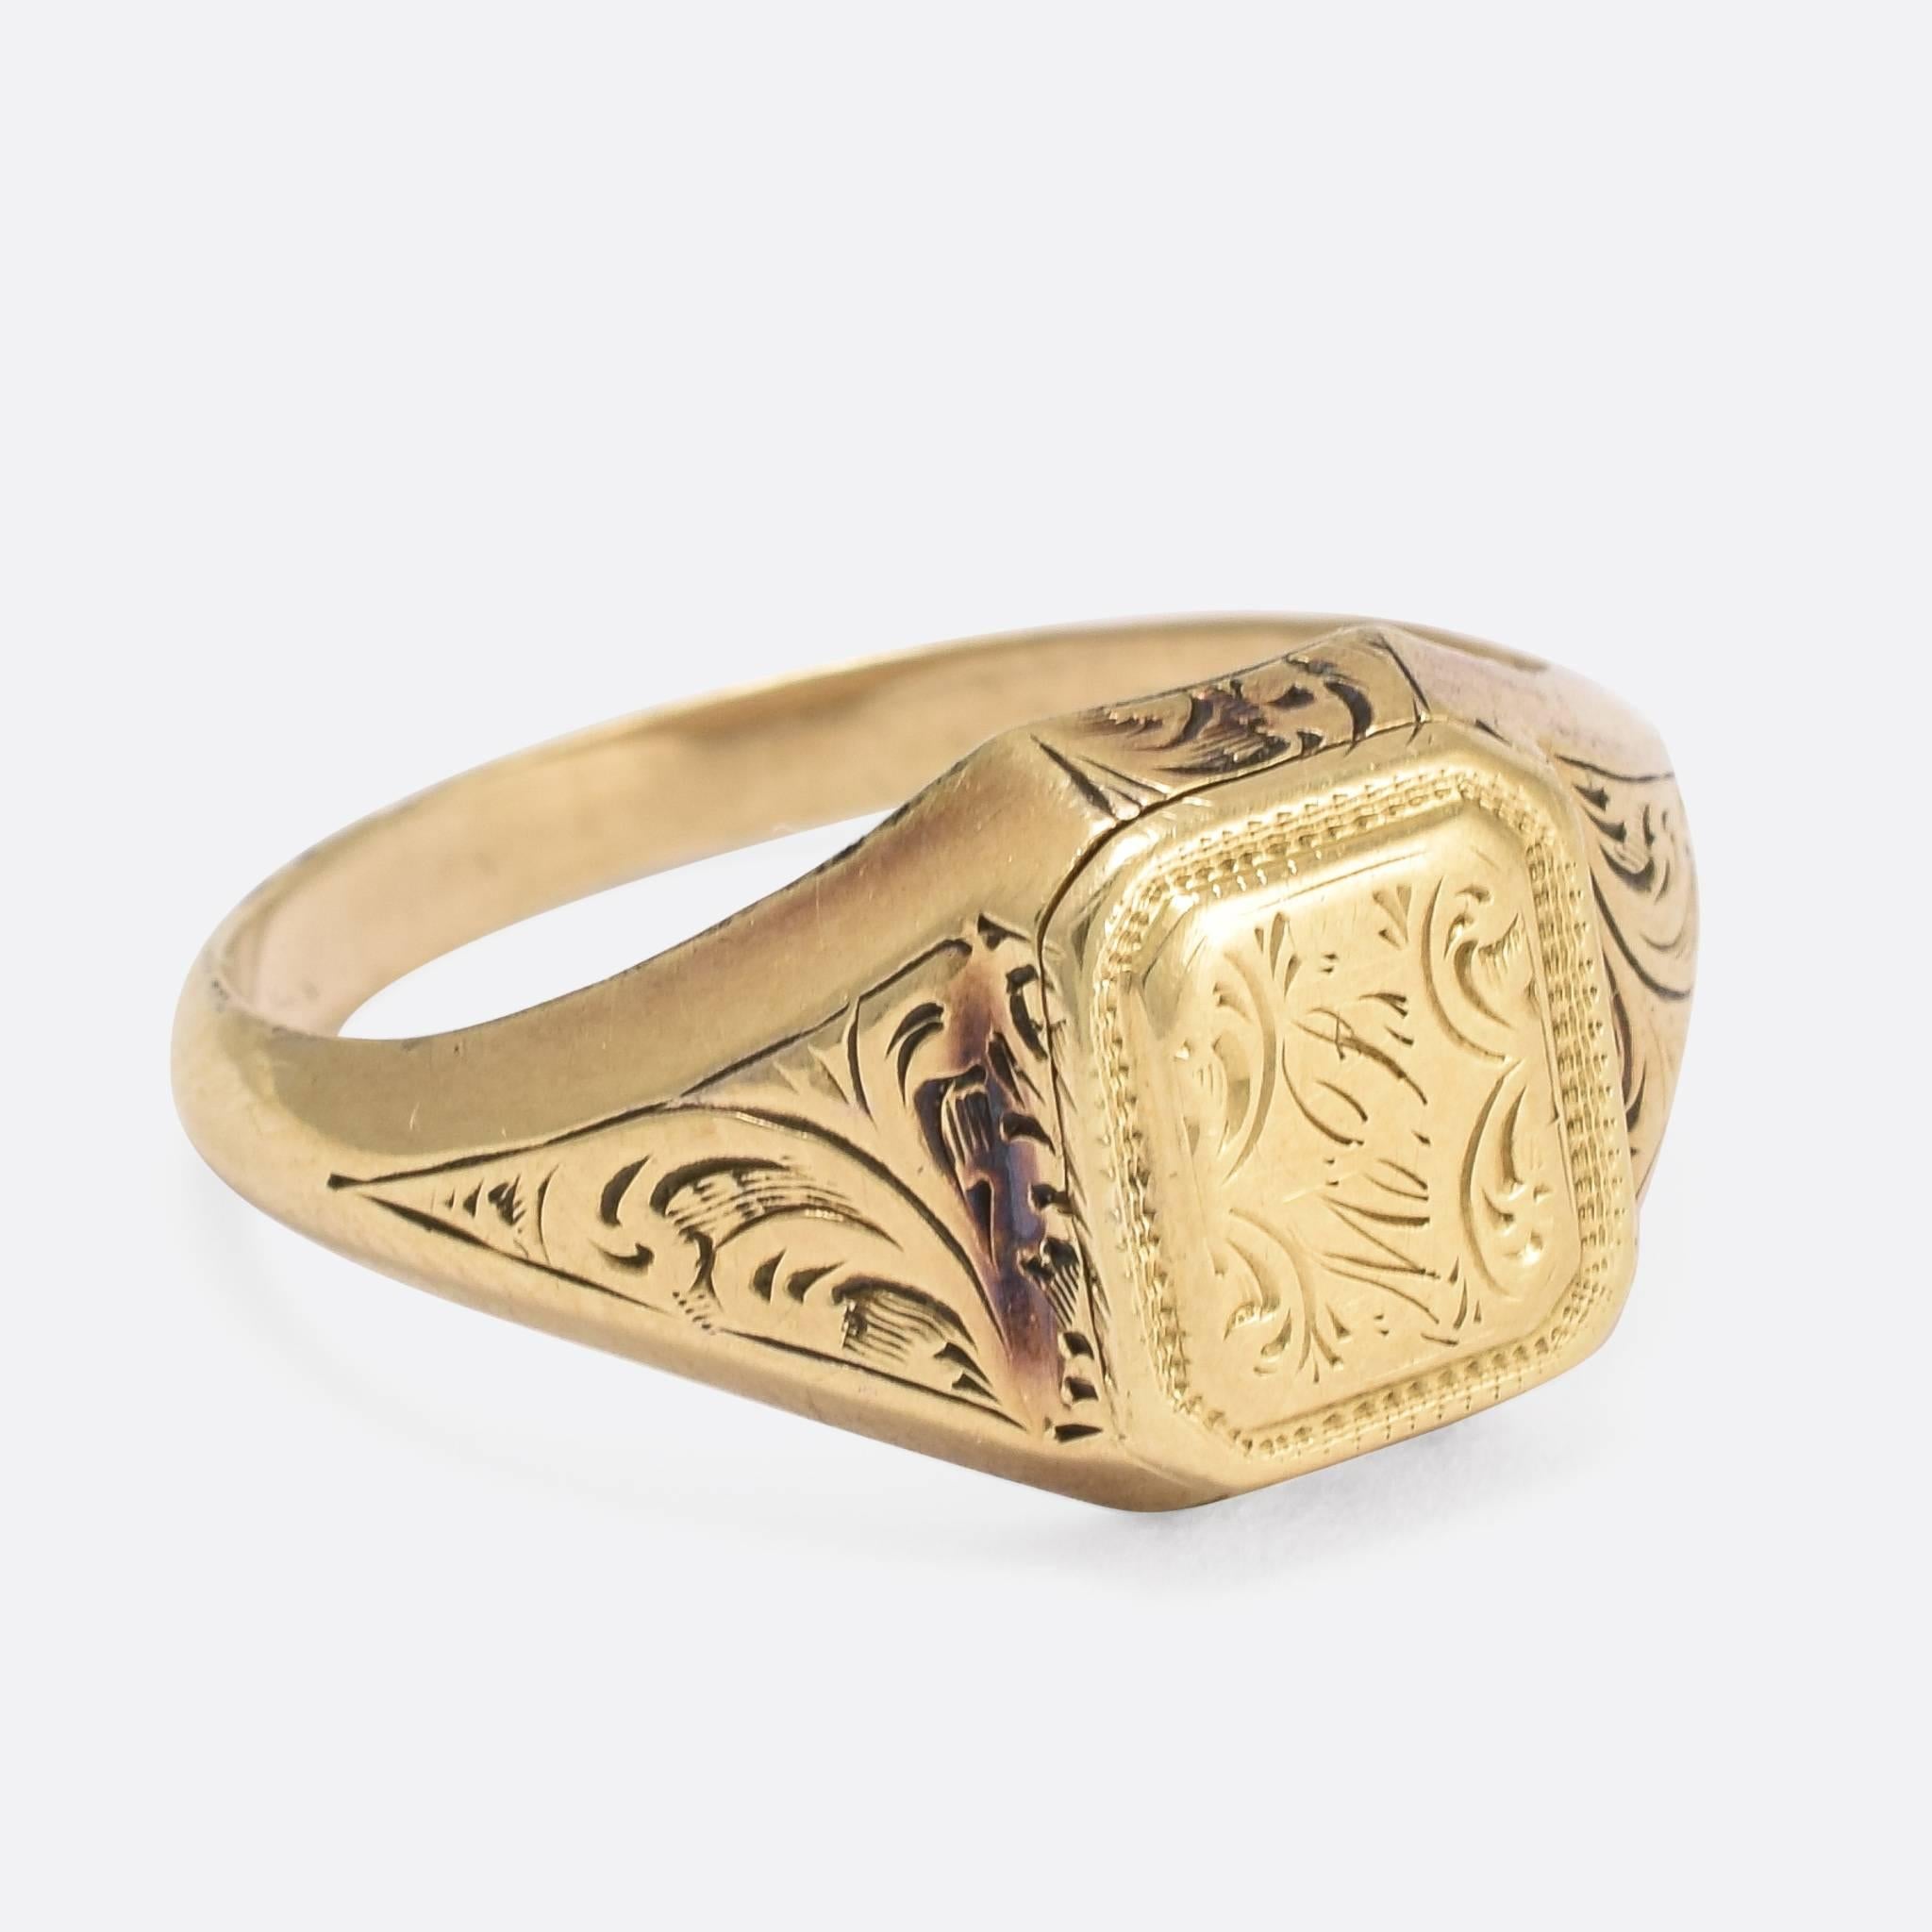 This fabulous antique signet ring features a hidden locket compartment on the face. The hinged front opens to reveal a small glass compartment. The shoulders and face are beautifully hand-chased, and the ring modelled in 15ct gold. Ring Size: US: